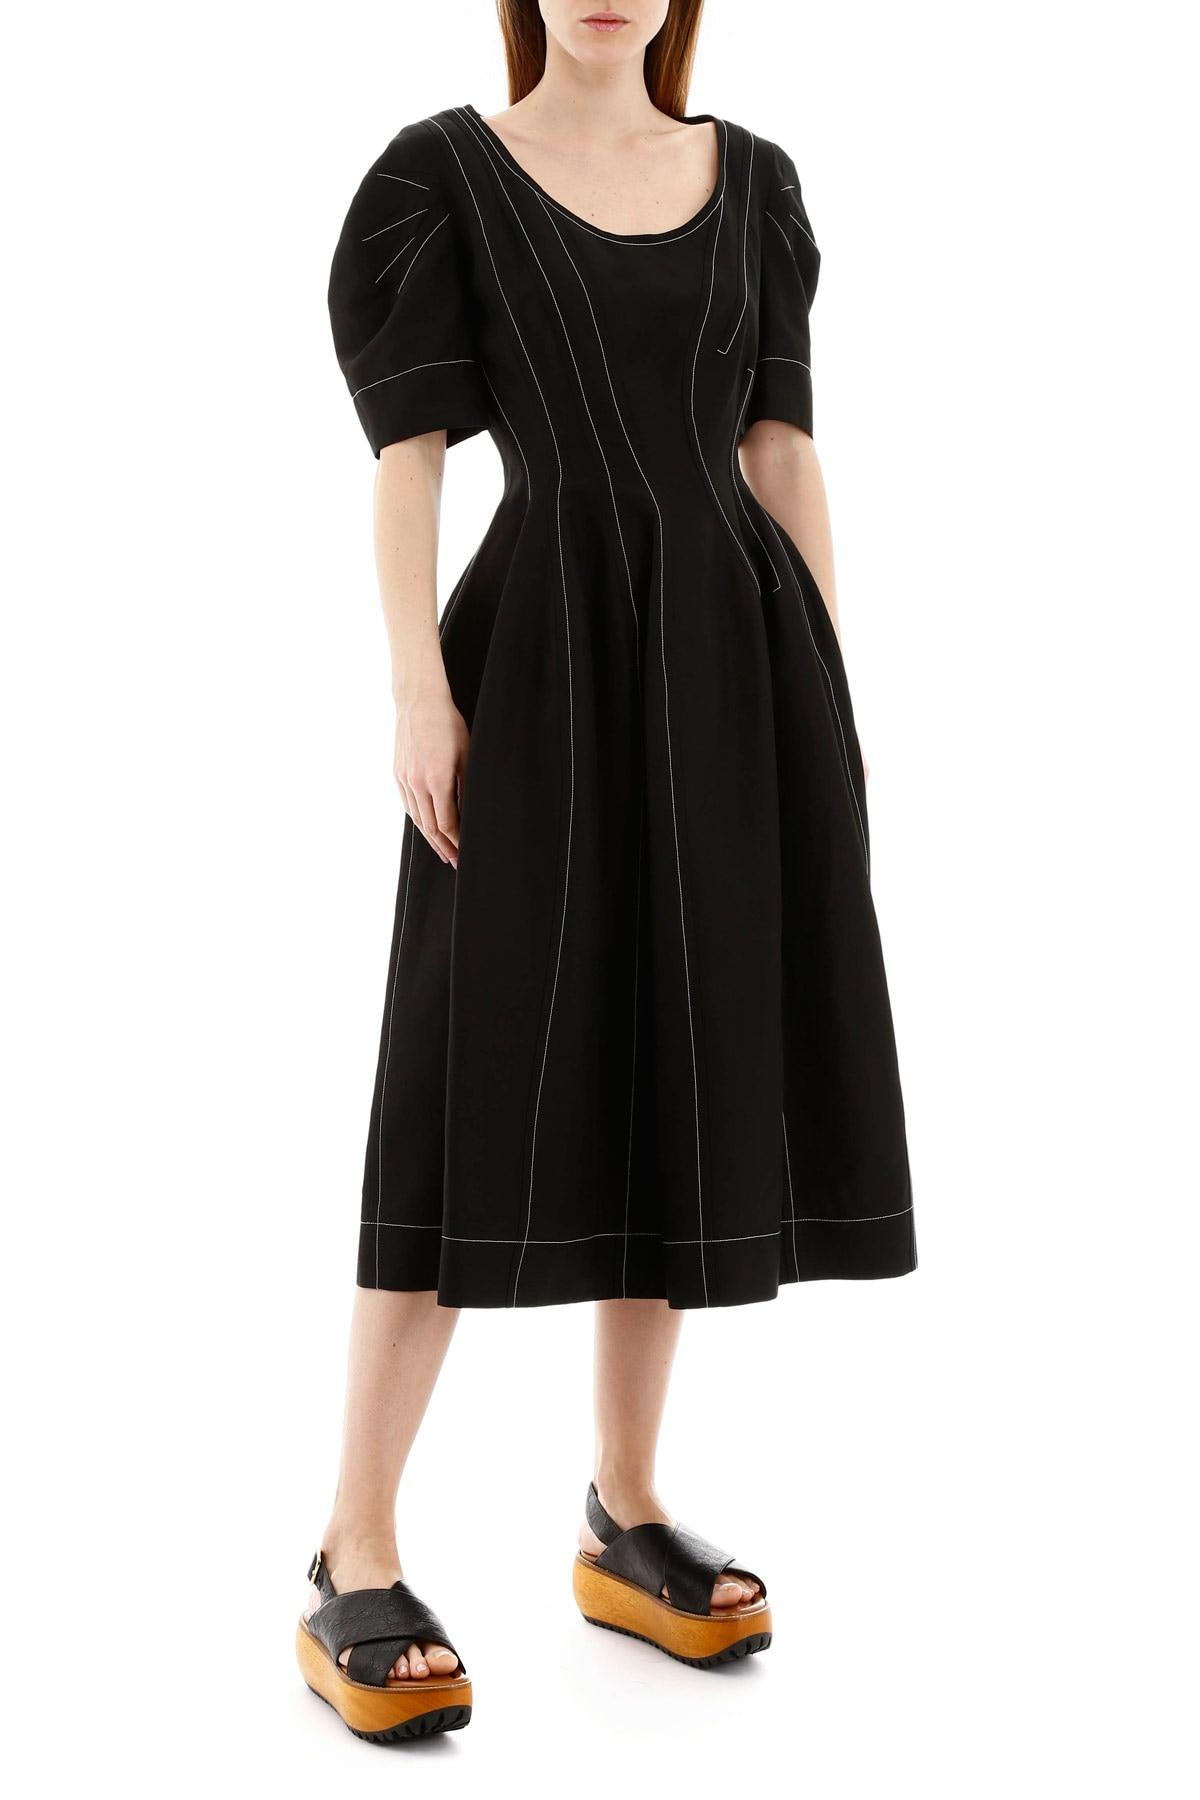 Marni Synthetic Dress With Stitching in ...